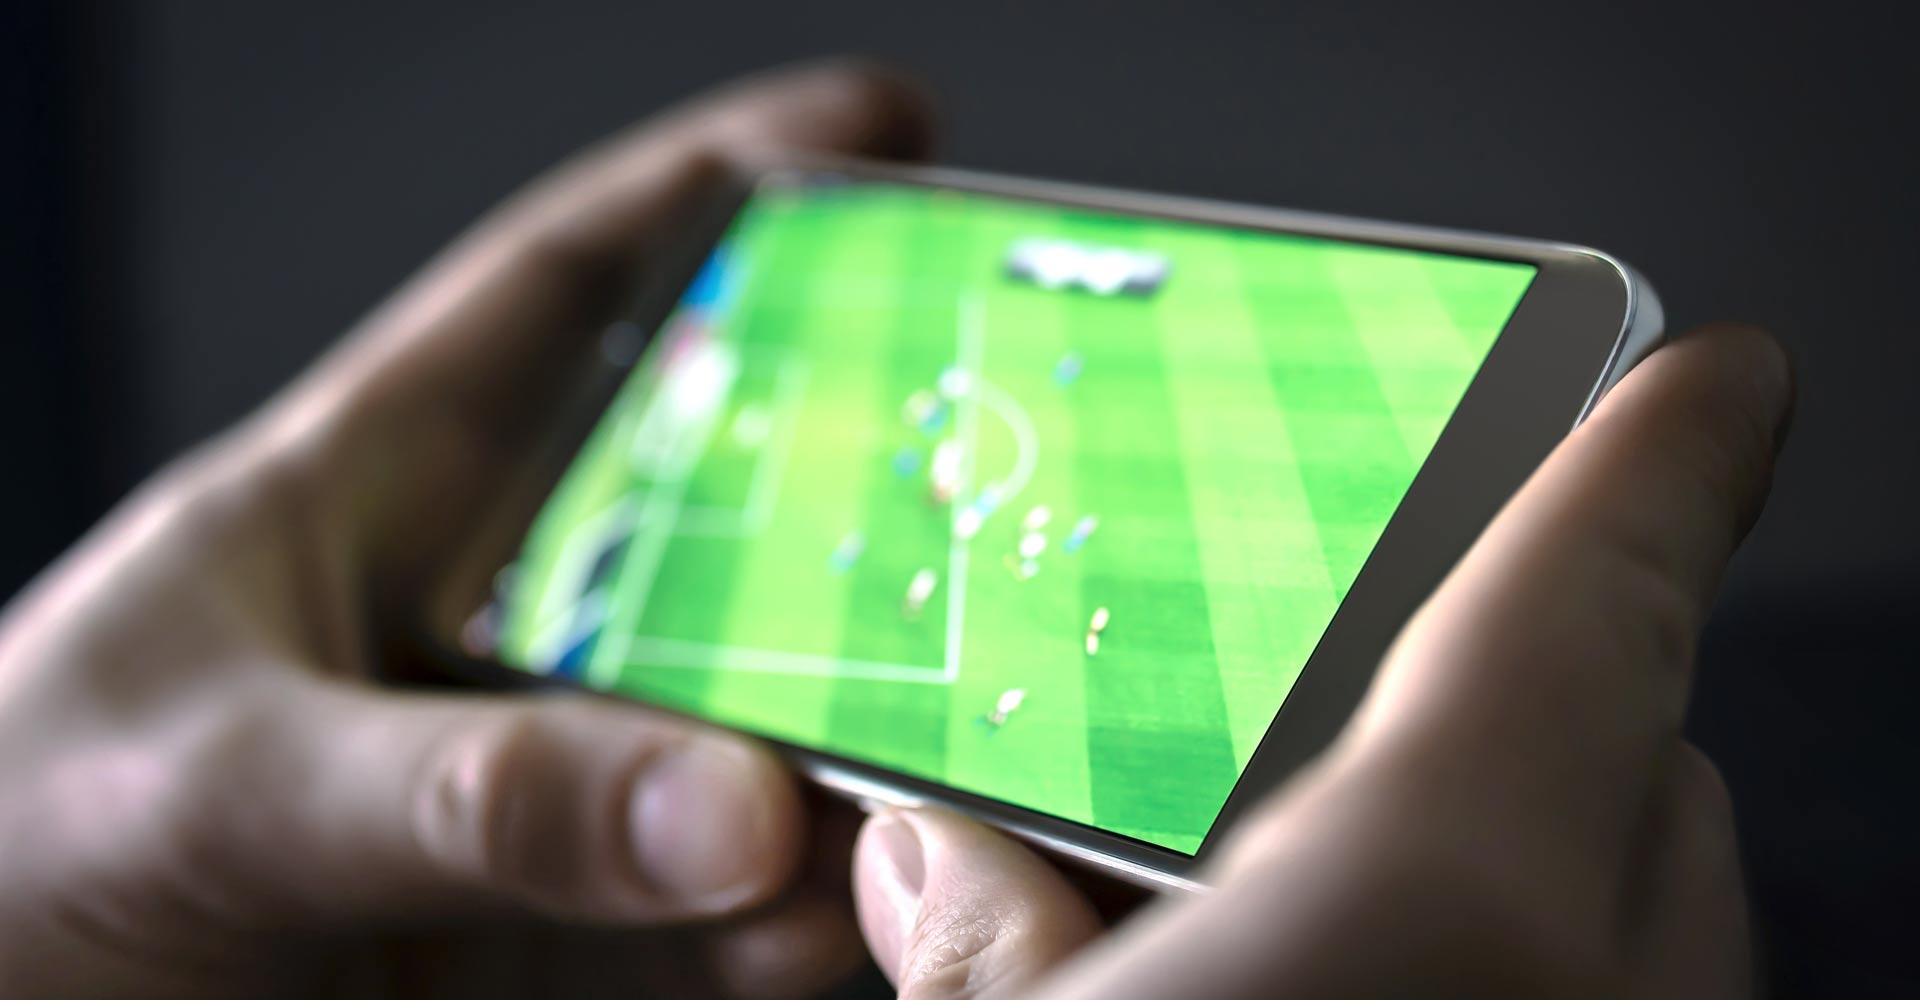 Data Shows Streaming Champions League Football Matches from Unverified Sources is One of the Hottest Ways for Cyber Hooligans to Hack Devices 